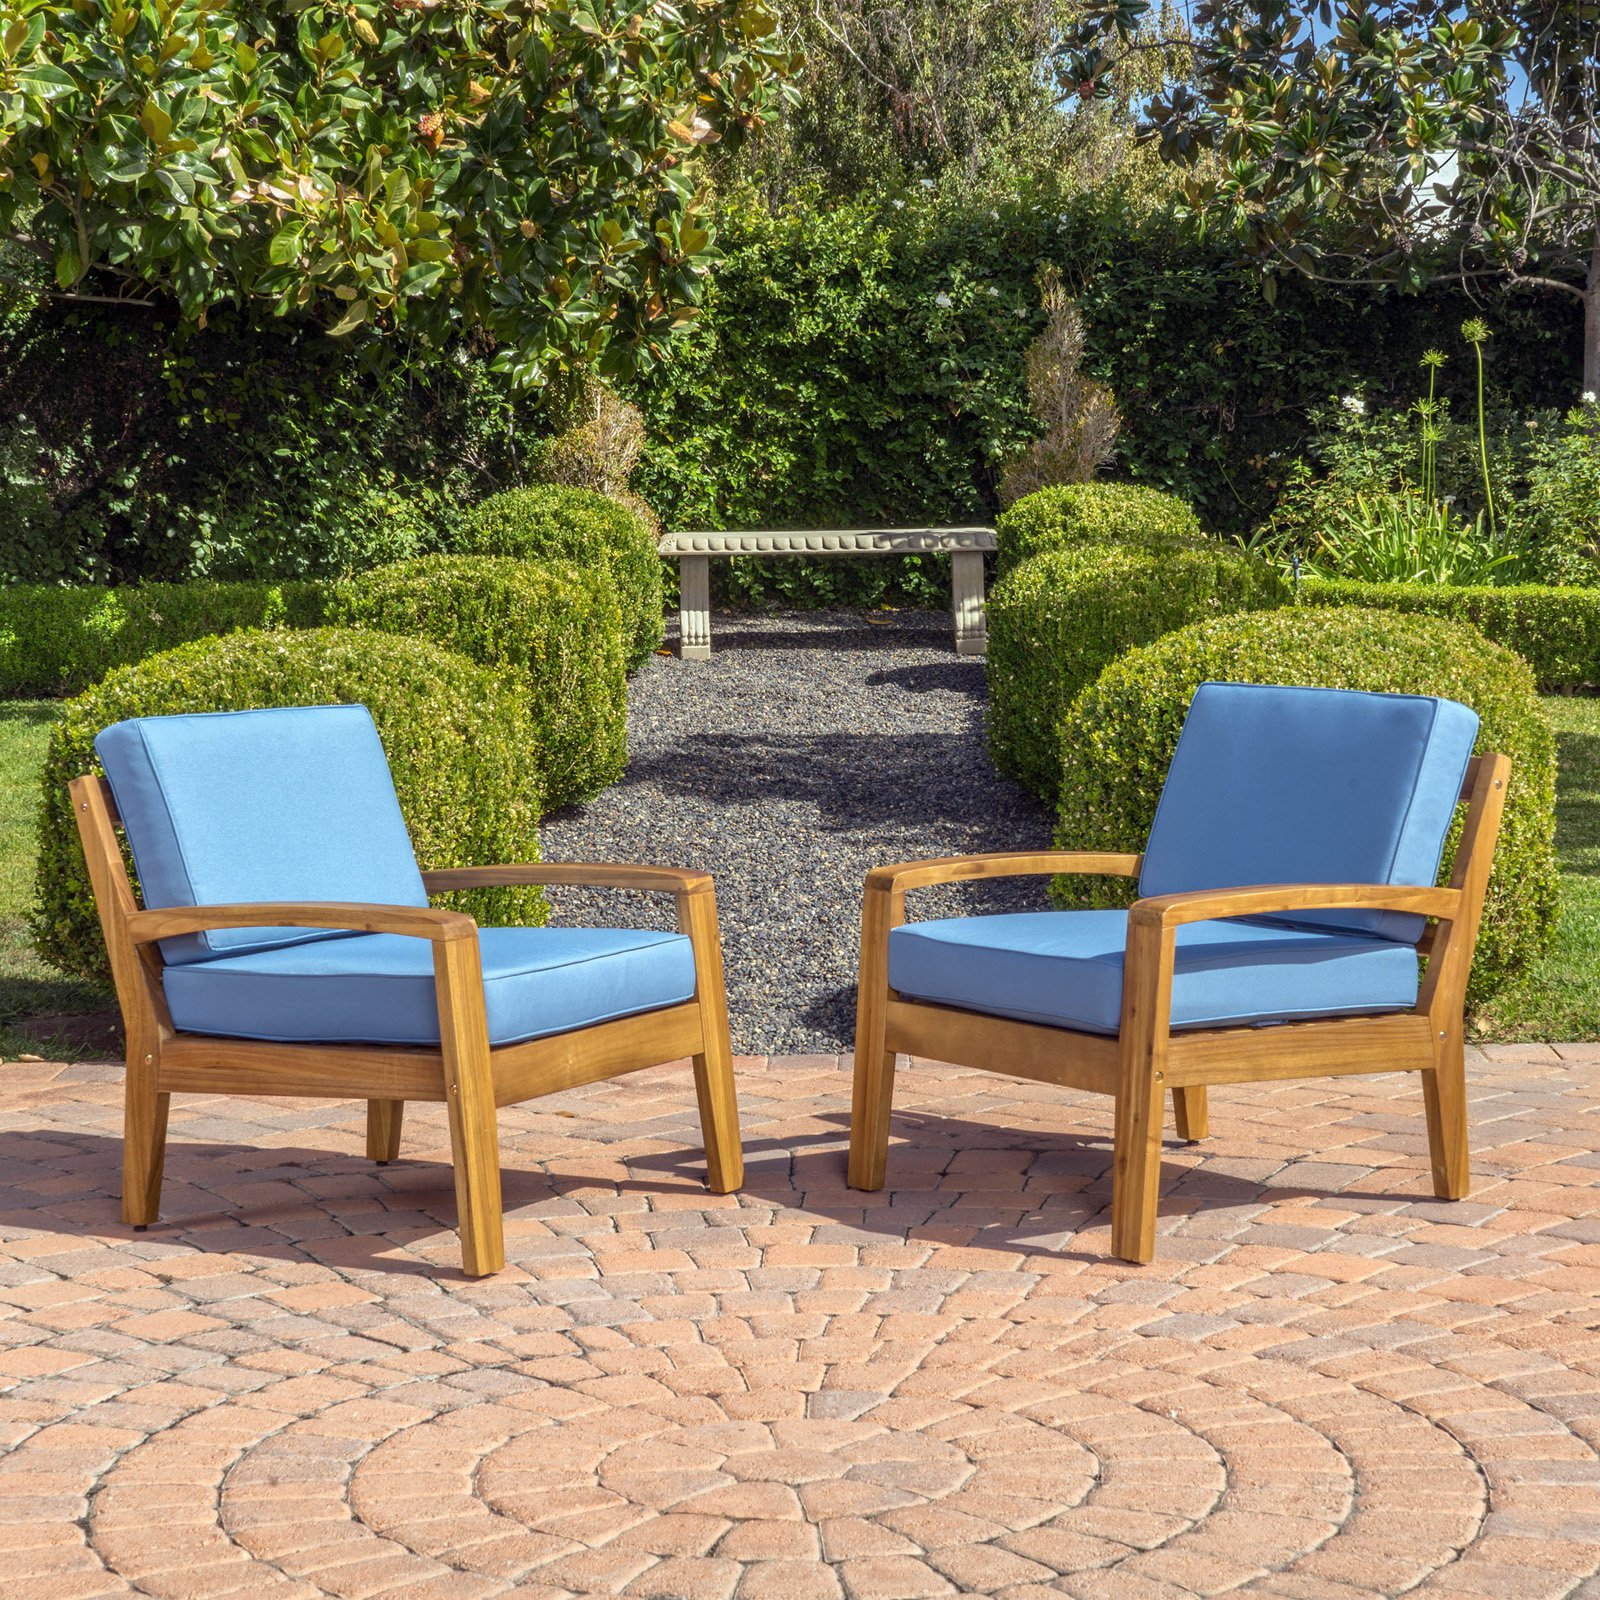 Gorlomi Wooden Patio Club Chairs with Cushions - image 5 of 6